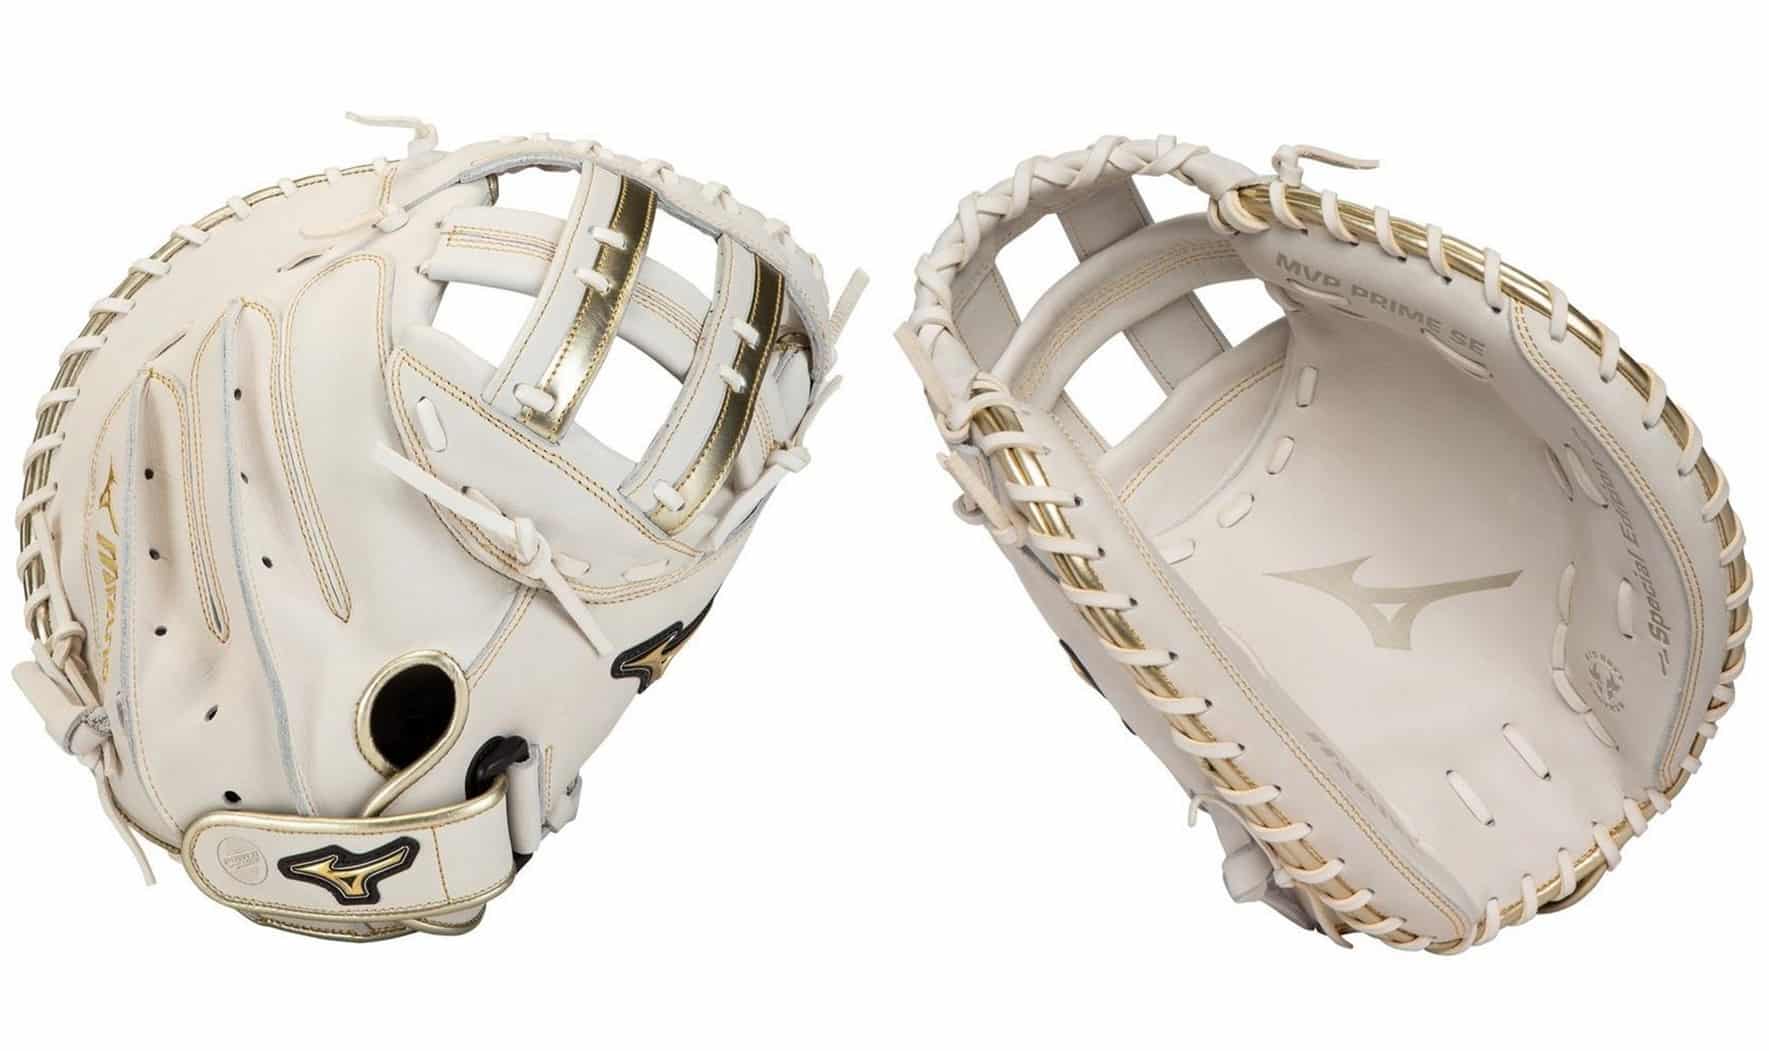 Best Left Handed Catchers Mitts - Our Top Picks [2021 Season]